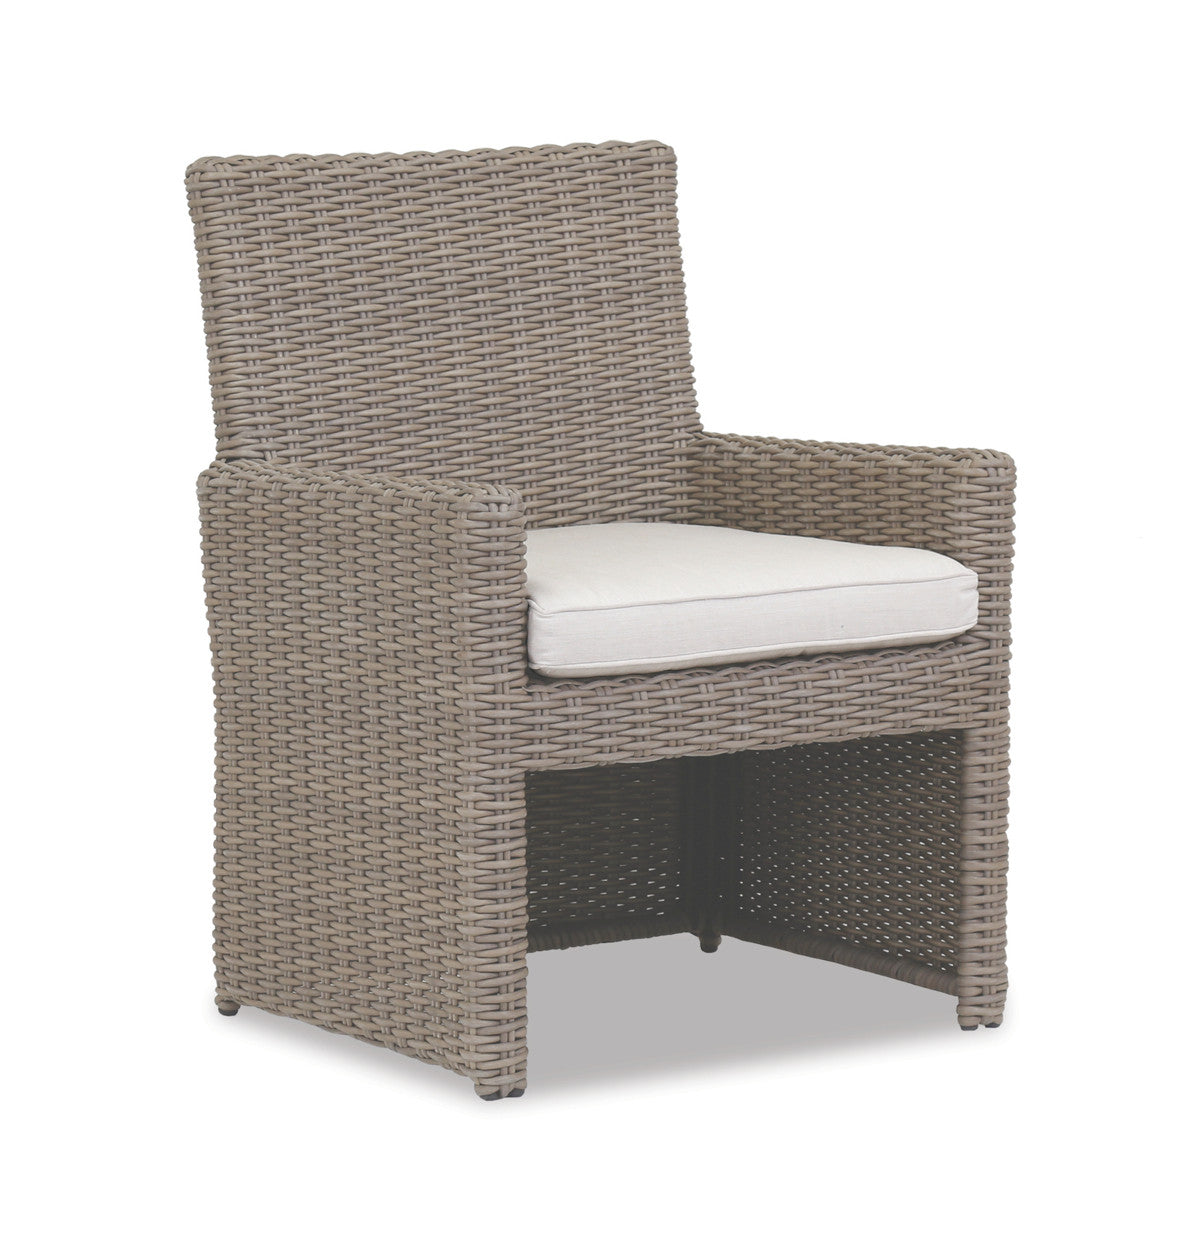 Sunset West Coronado Dining Chair With Cushions